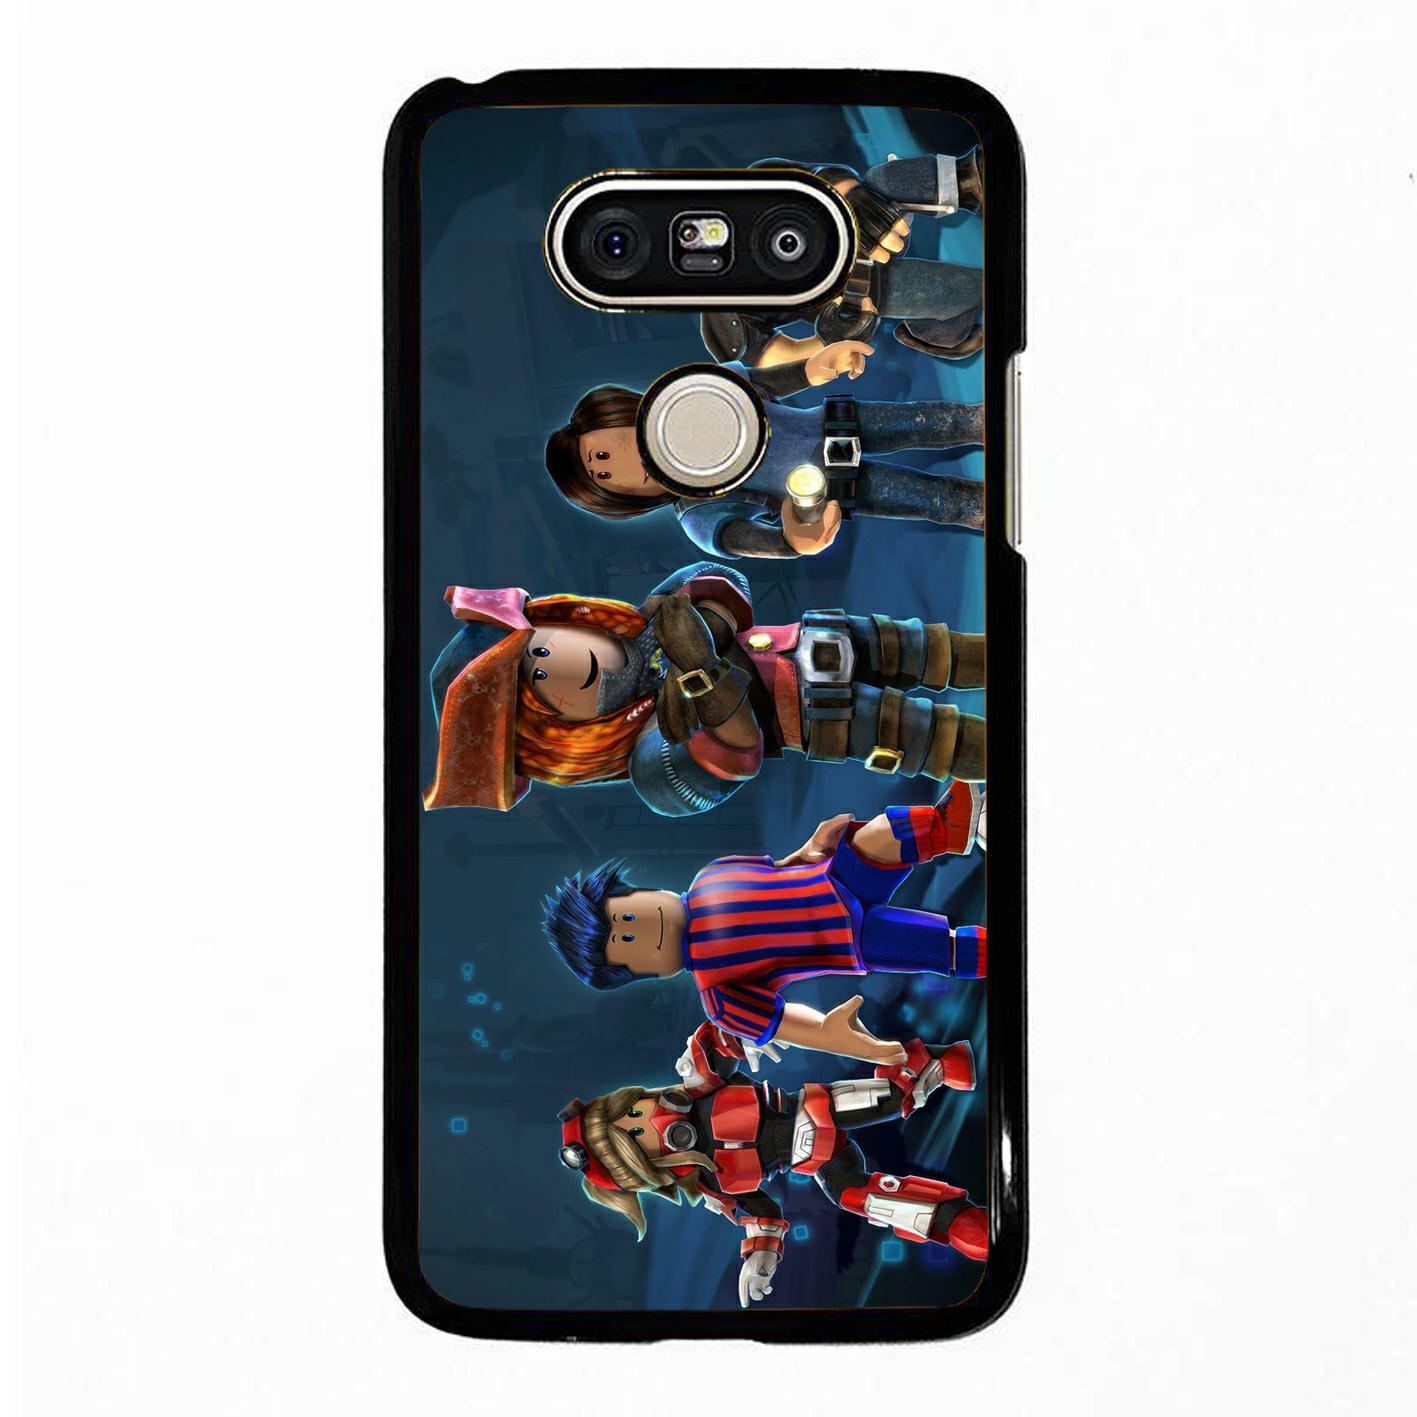 Roblox 112 Lg G5 Case Lg And Android Teecustom - lg phone roblox